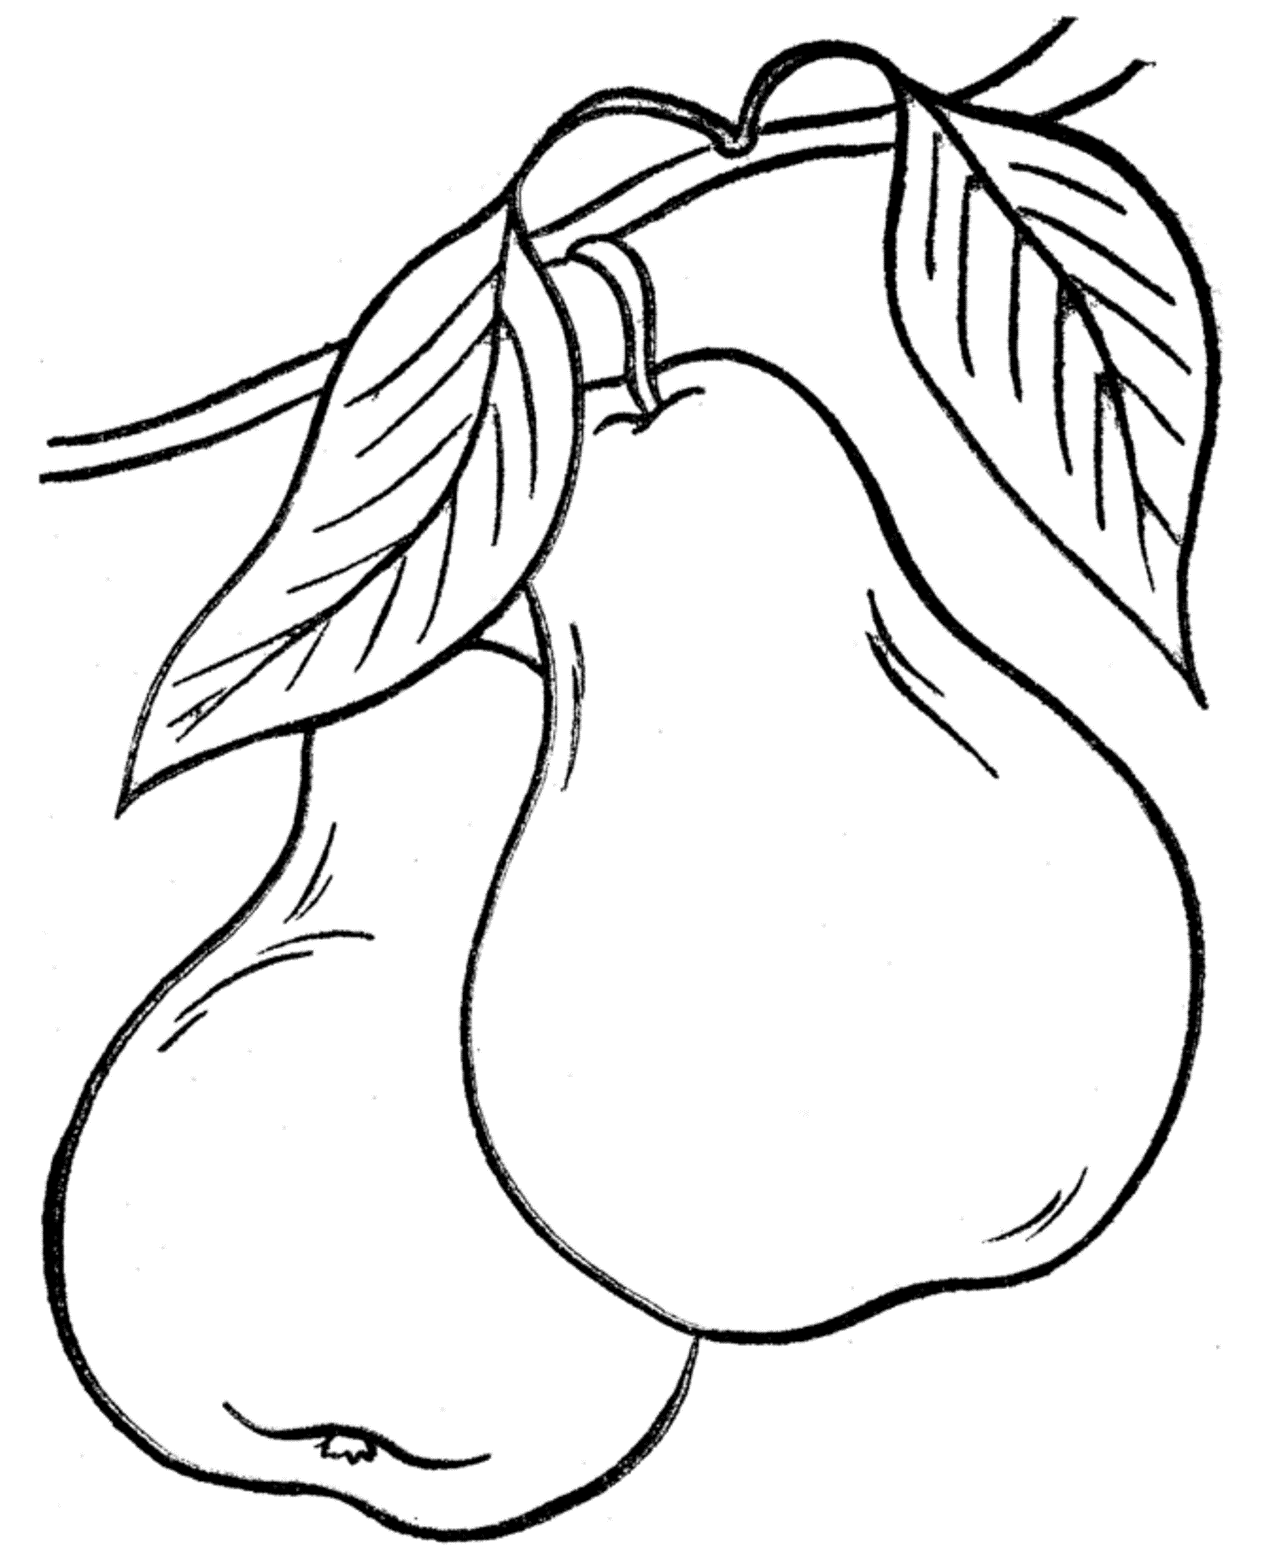 Fruit S Pears2389 Coloring Page